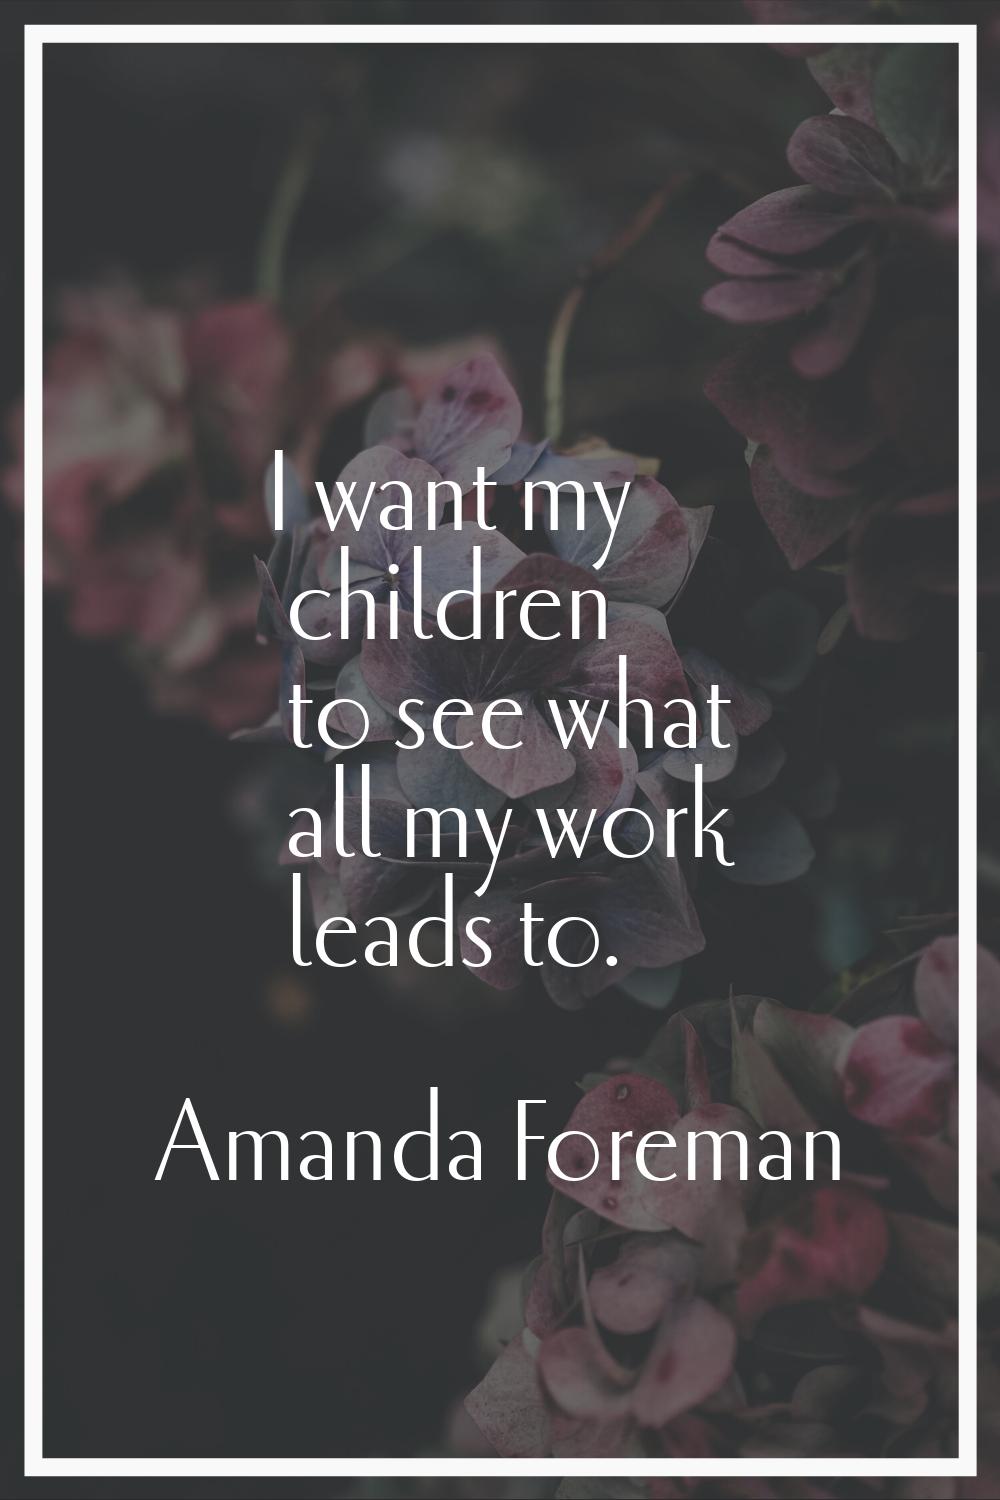 I want my children to see what all my work leads to.